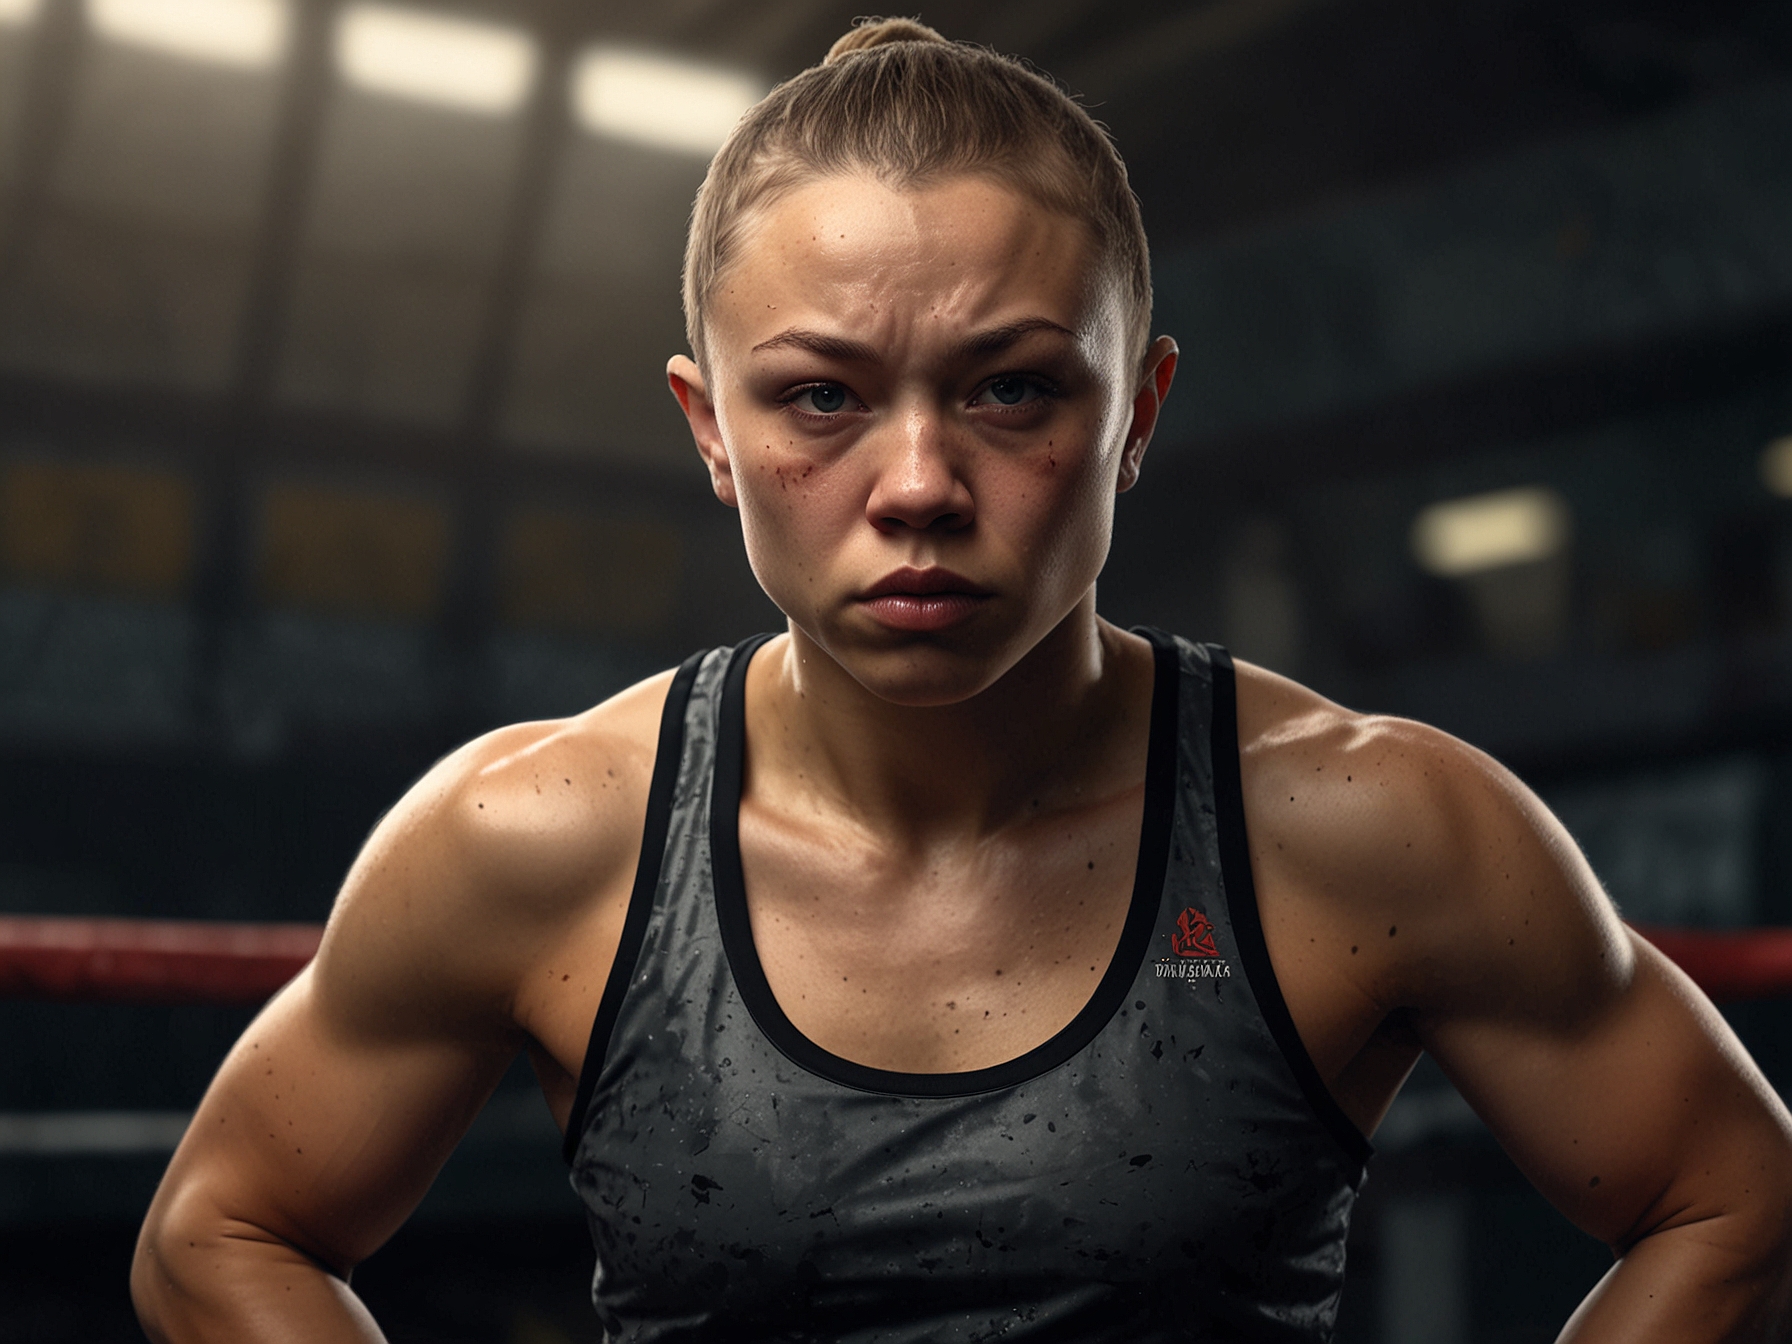 Rose Namajunas, looking determined and resilient, shadowboxing in a gym. The illustration highlights her intense preparation and mental toughness ahead of the fight.